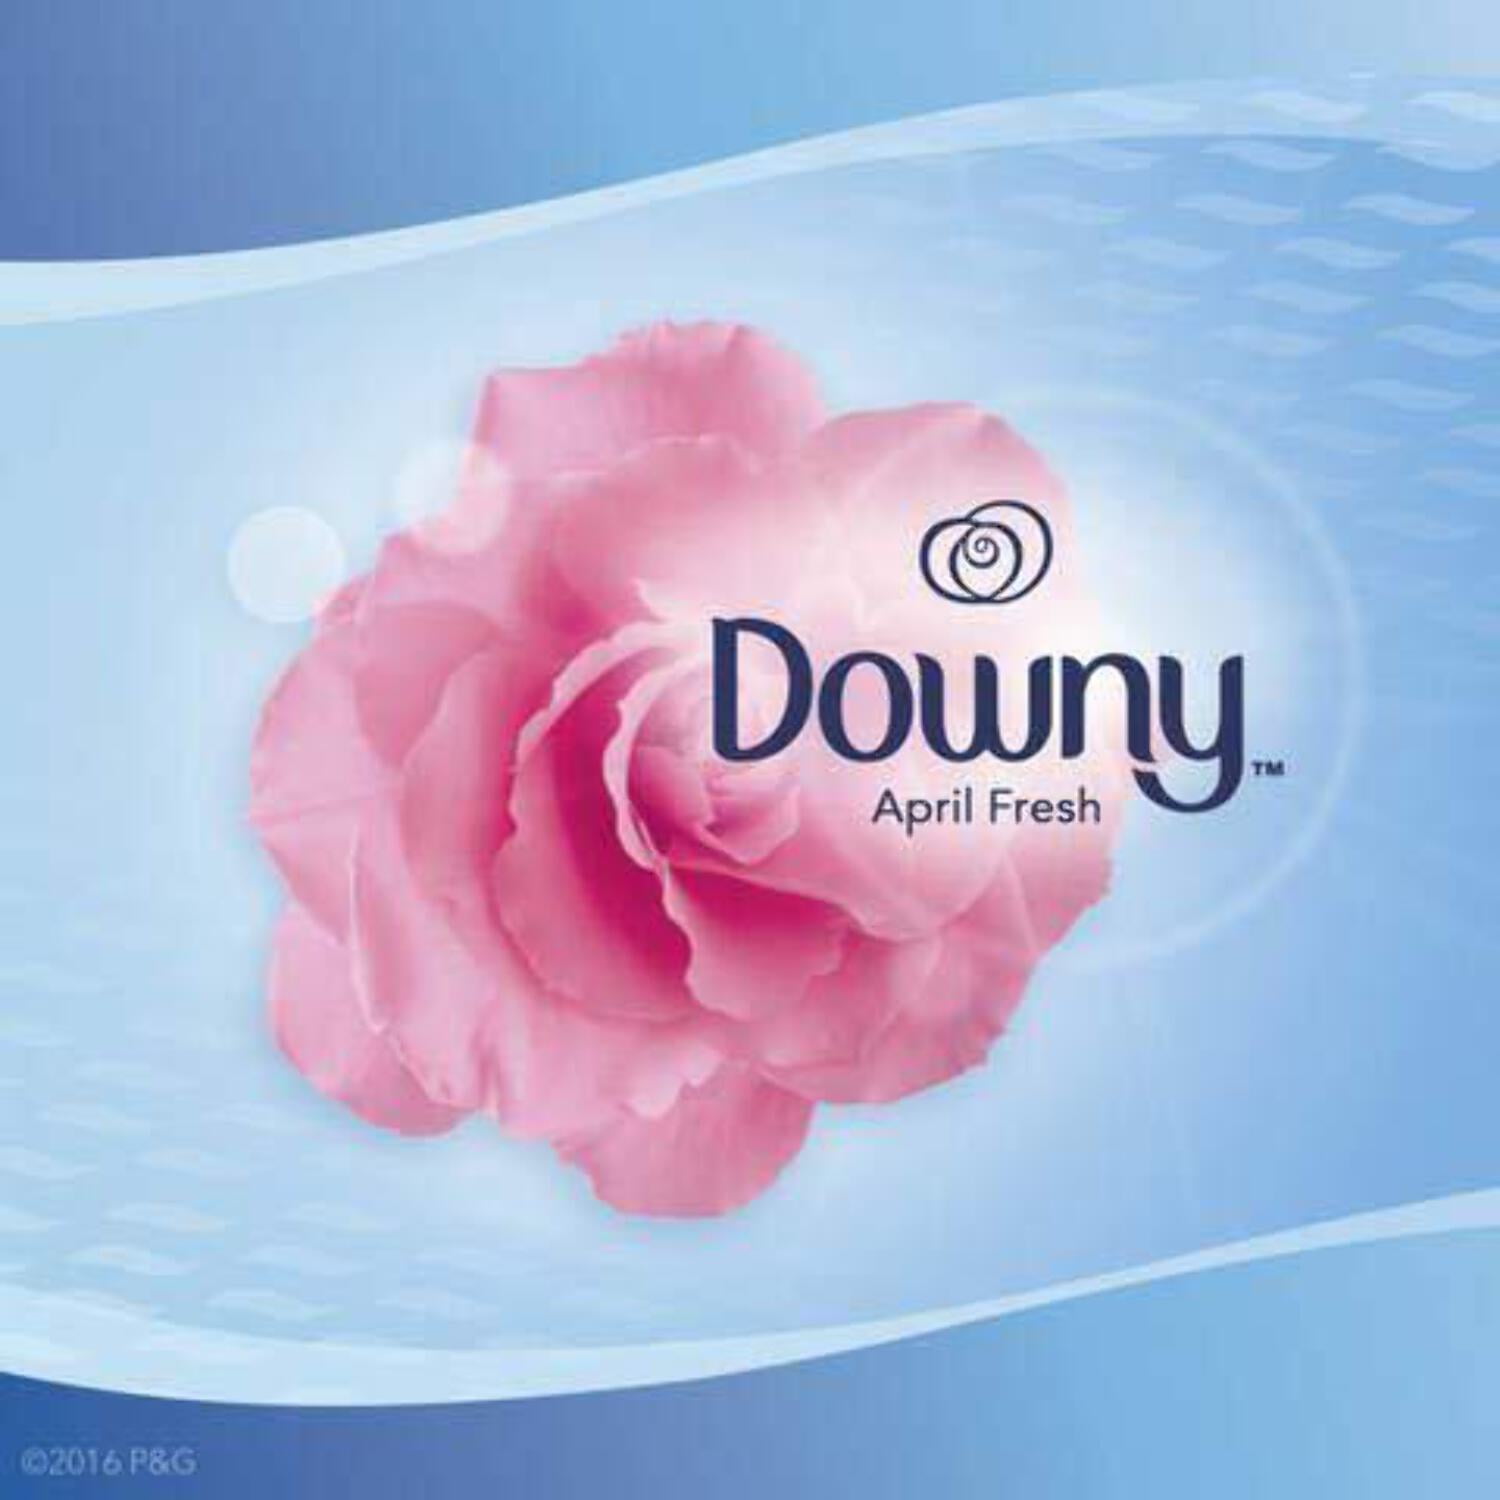 Febreze Wax Melts Air Freshener - with Downy April Fresh Scent